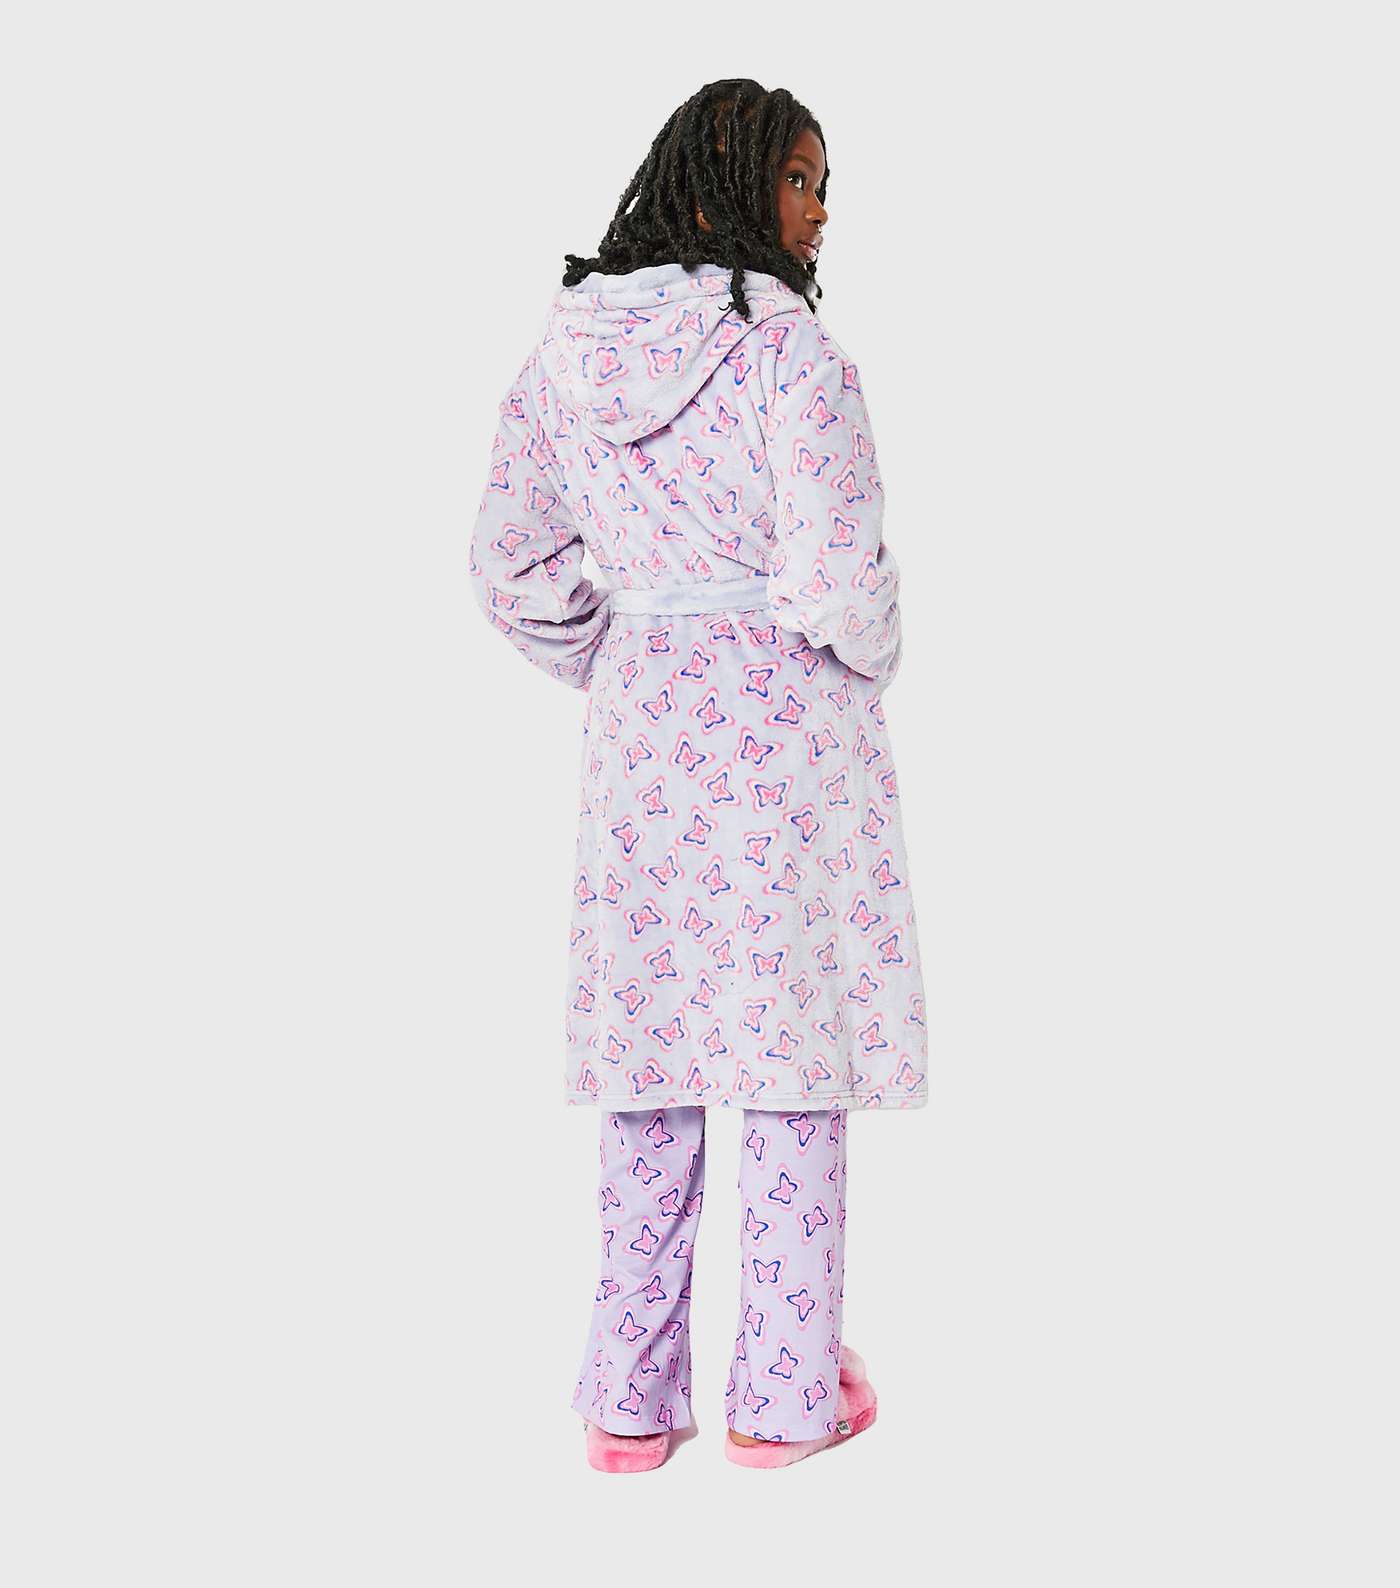 Skinnydip Lilac Butterfly Fleece Hooded Dressing Gown Image 5